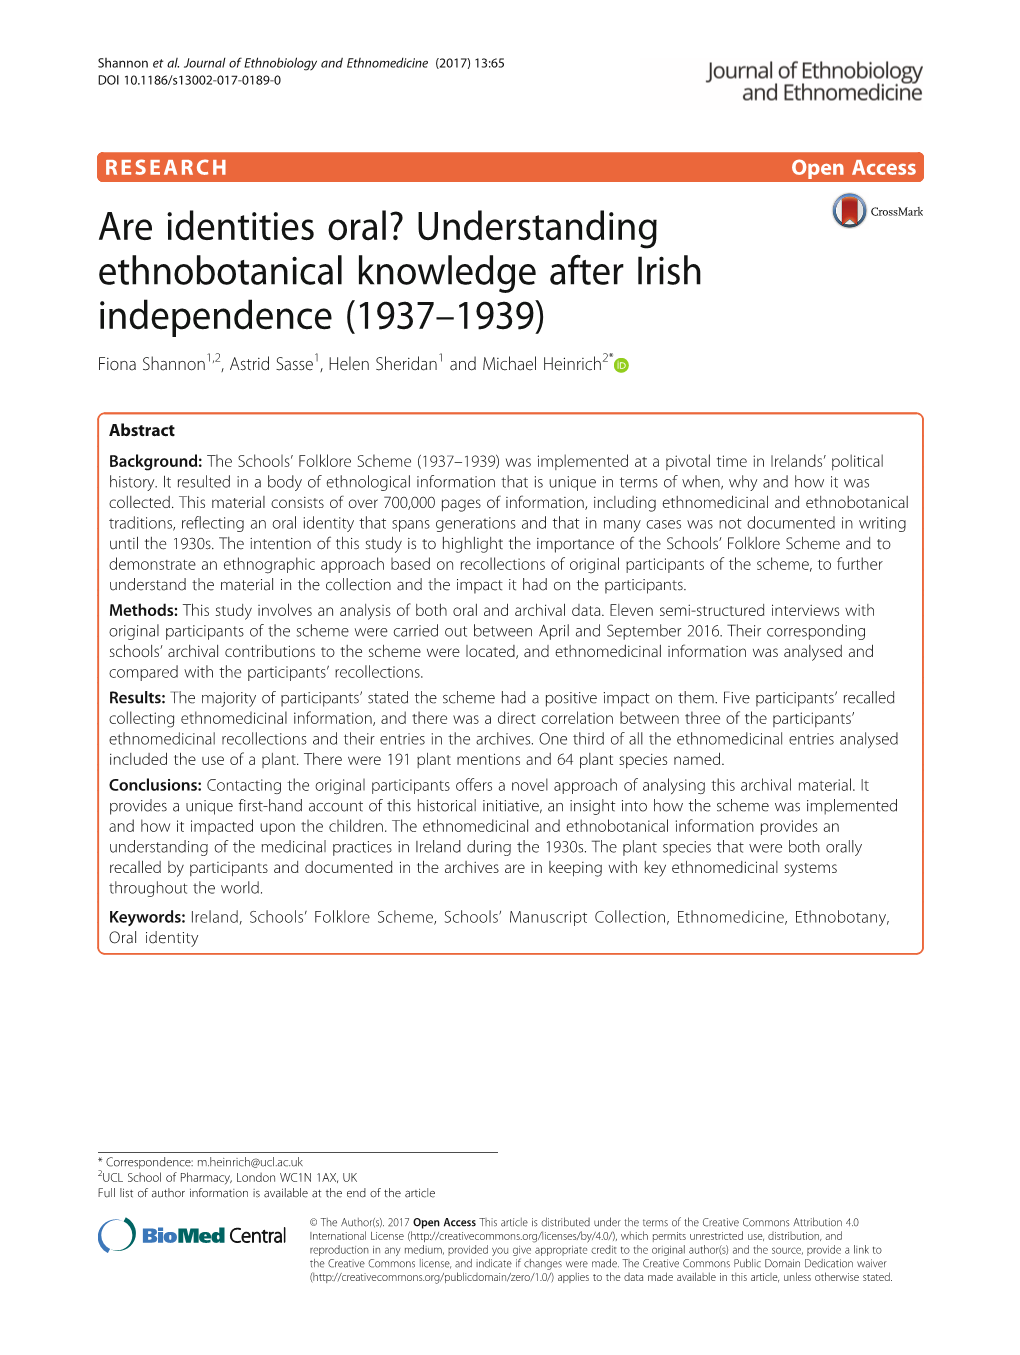 Are Identities Oral? Understanding Ethnobotanical Knowledge After Irish Independence